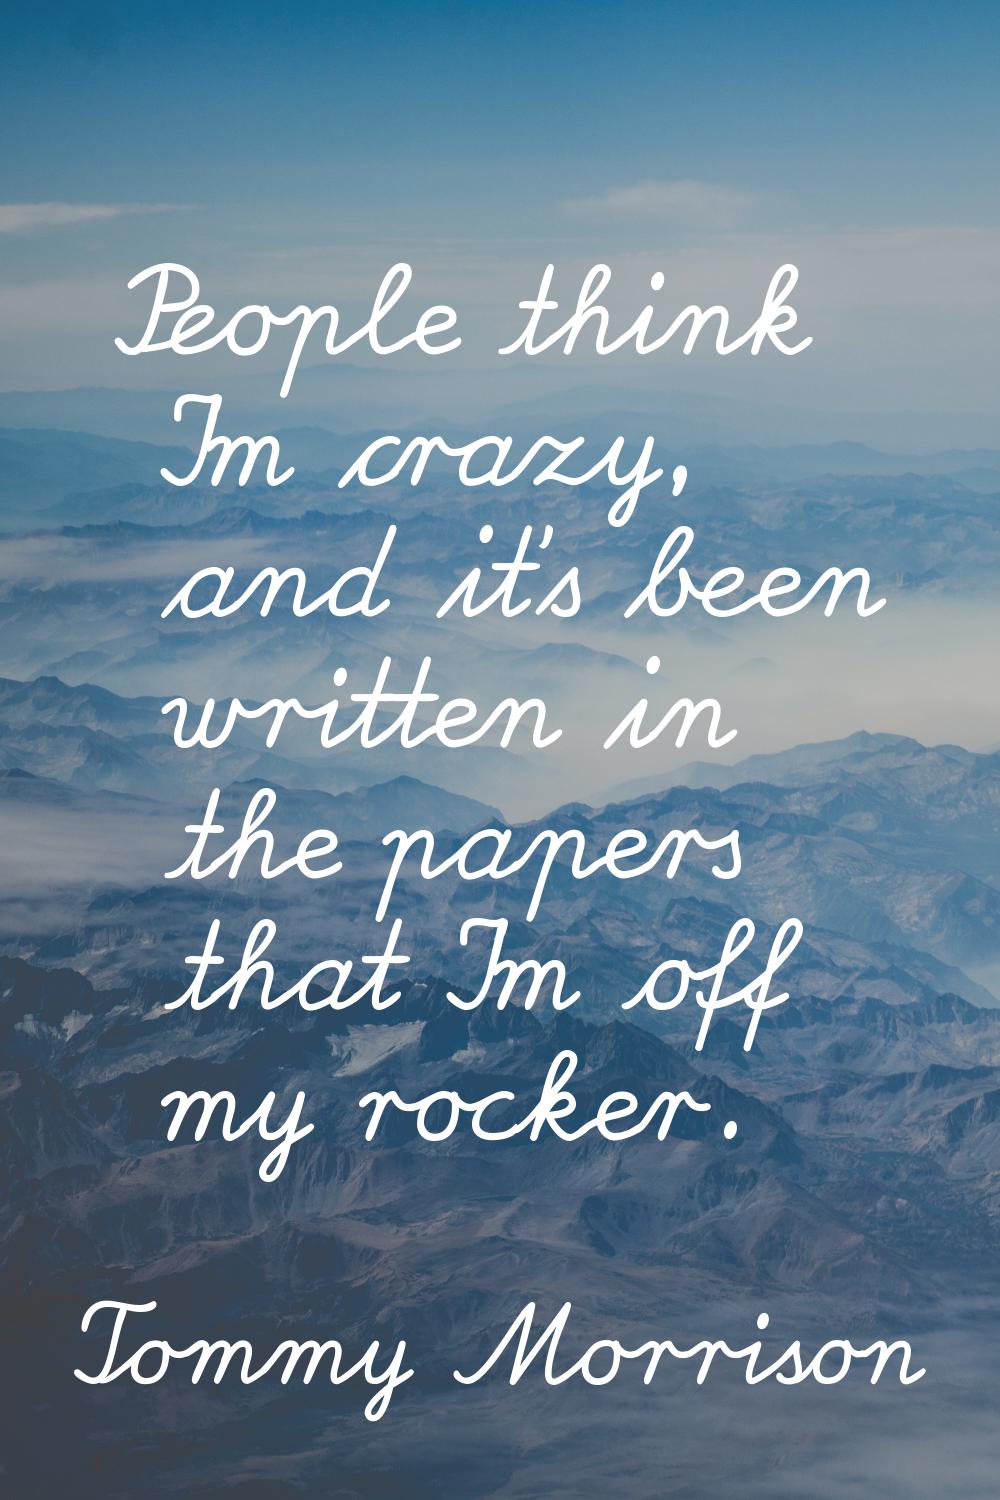 People think I'm crazy, and it's been written in the papers that I'm off my rocker.